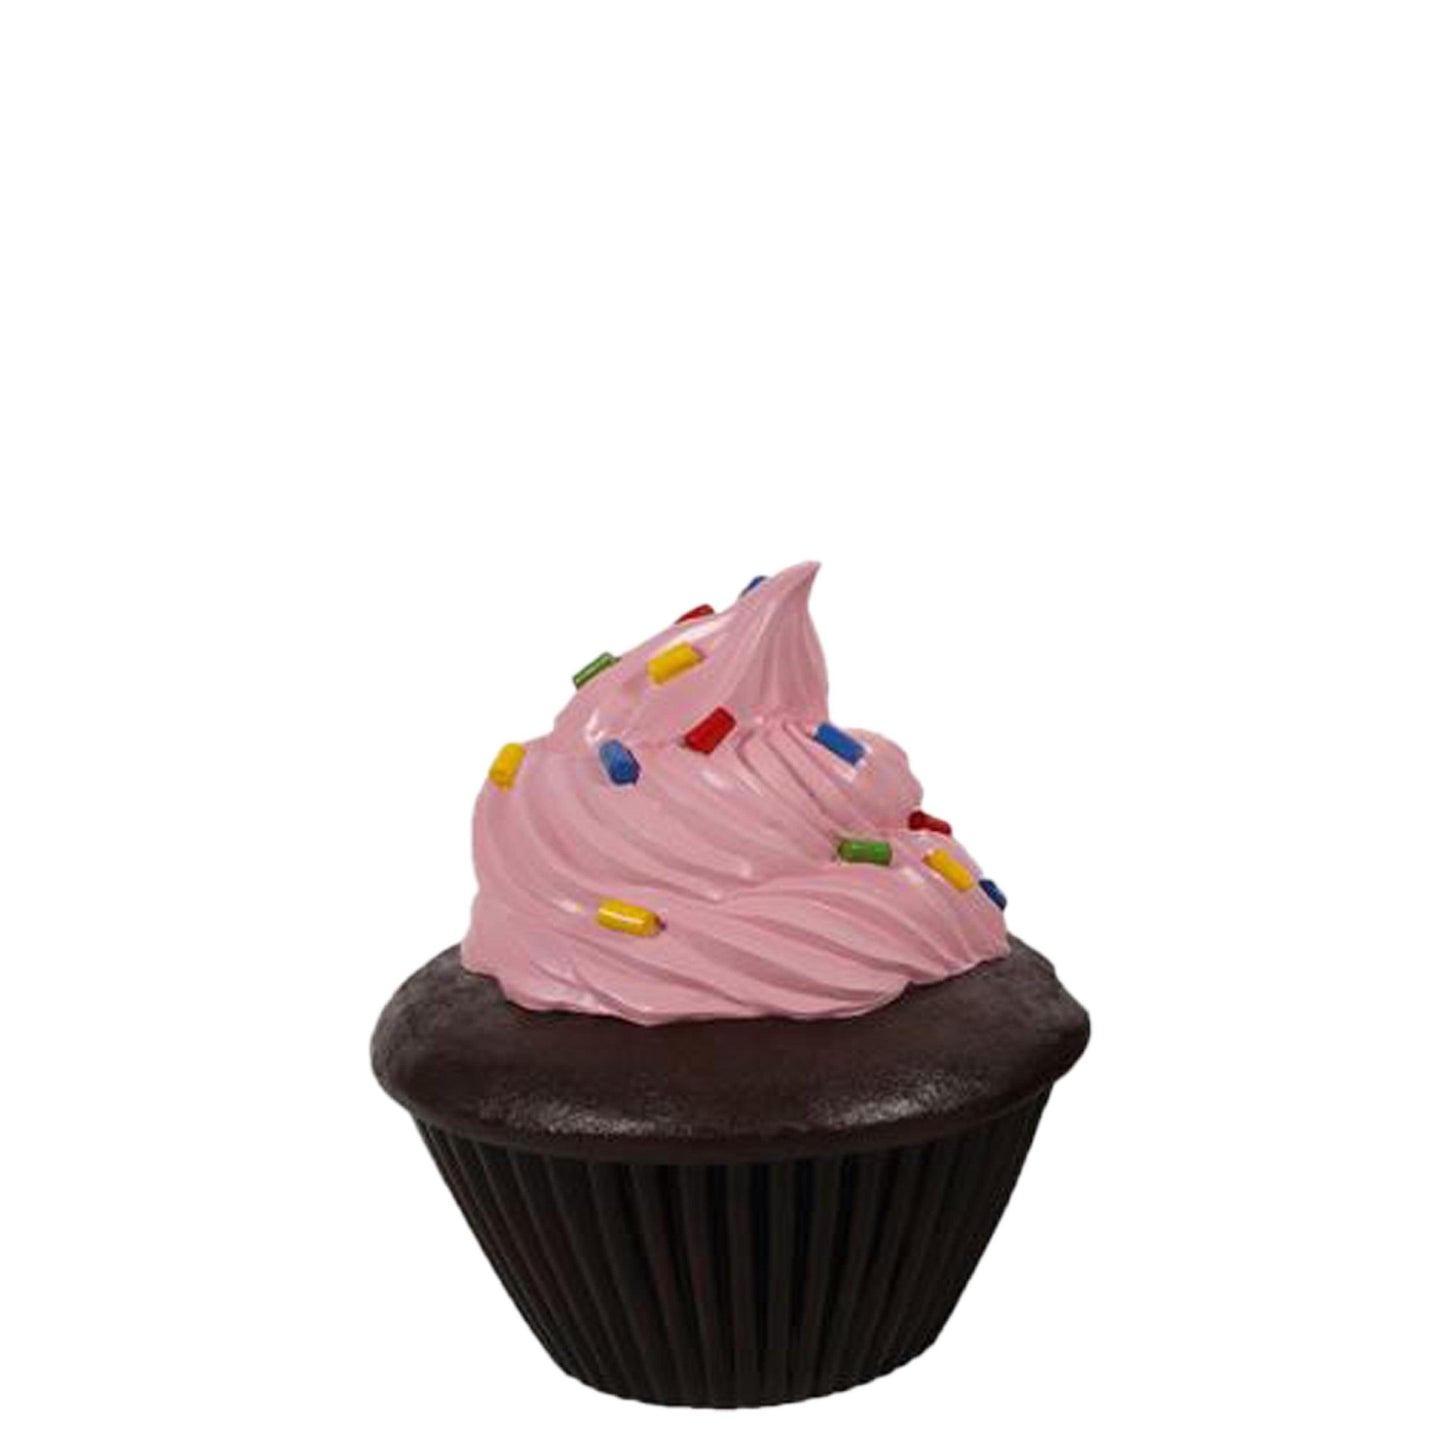 Pink Chocolate Cupcake Statue With Sprinkles